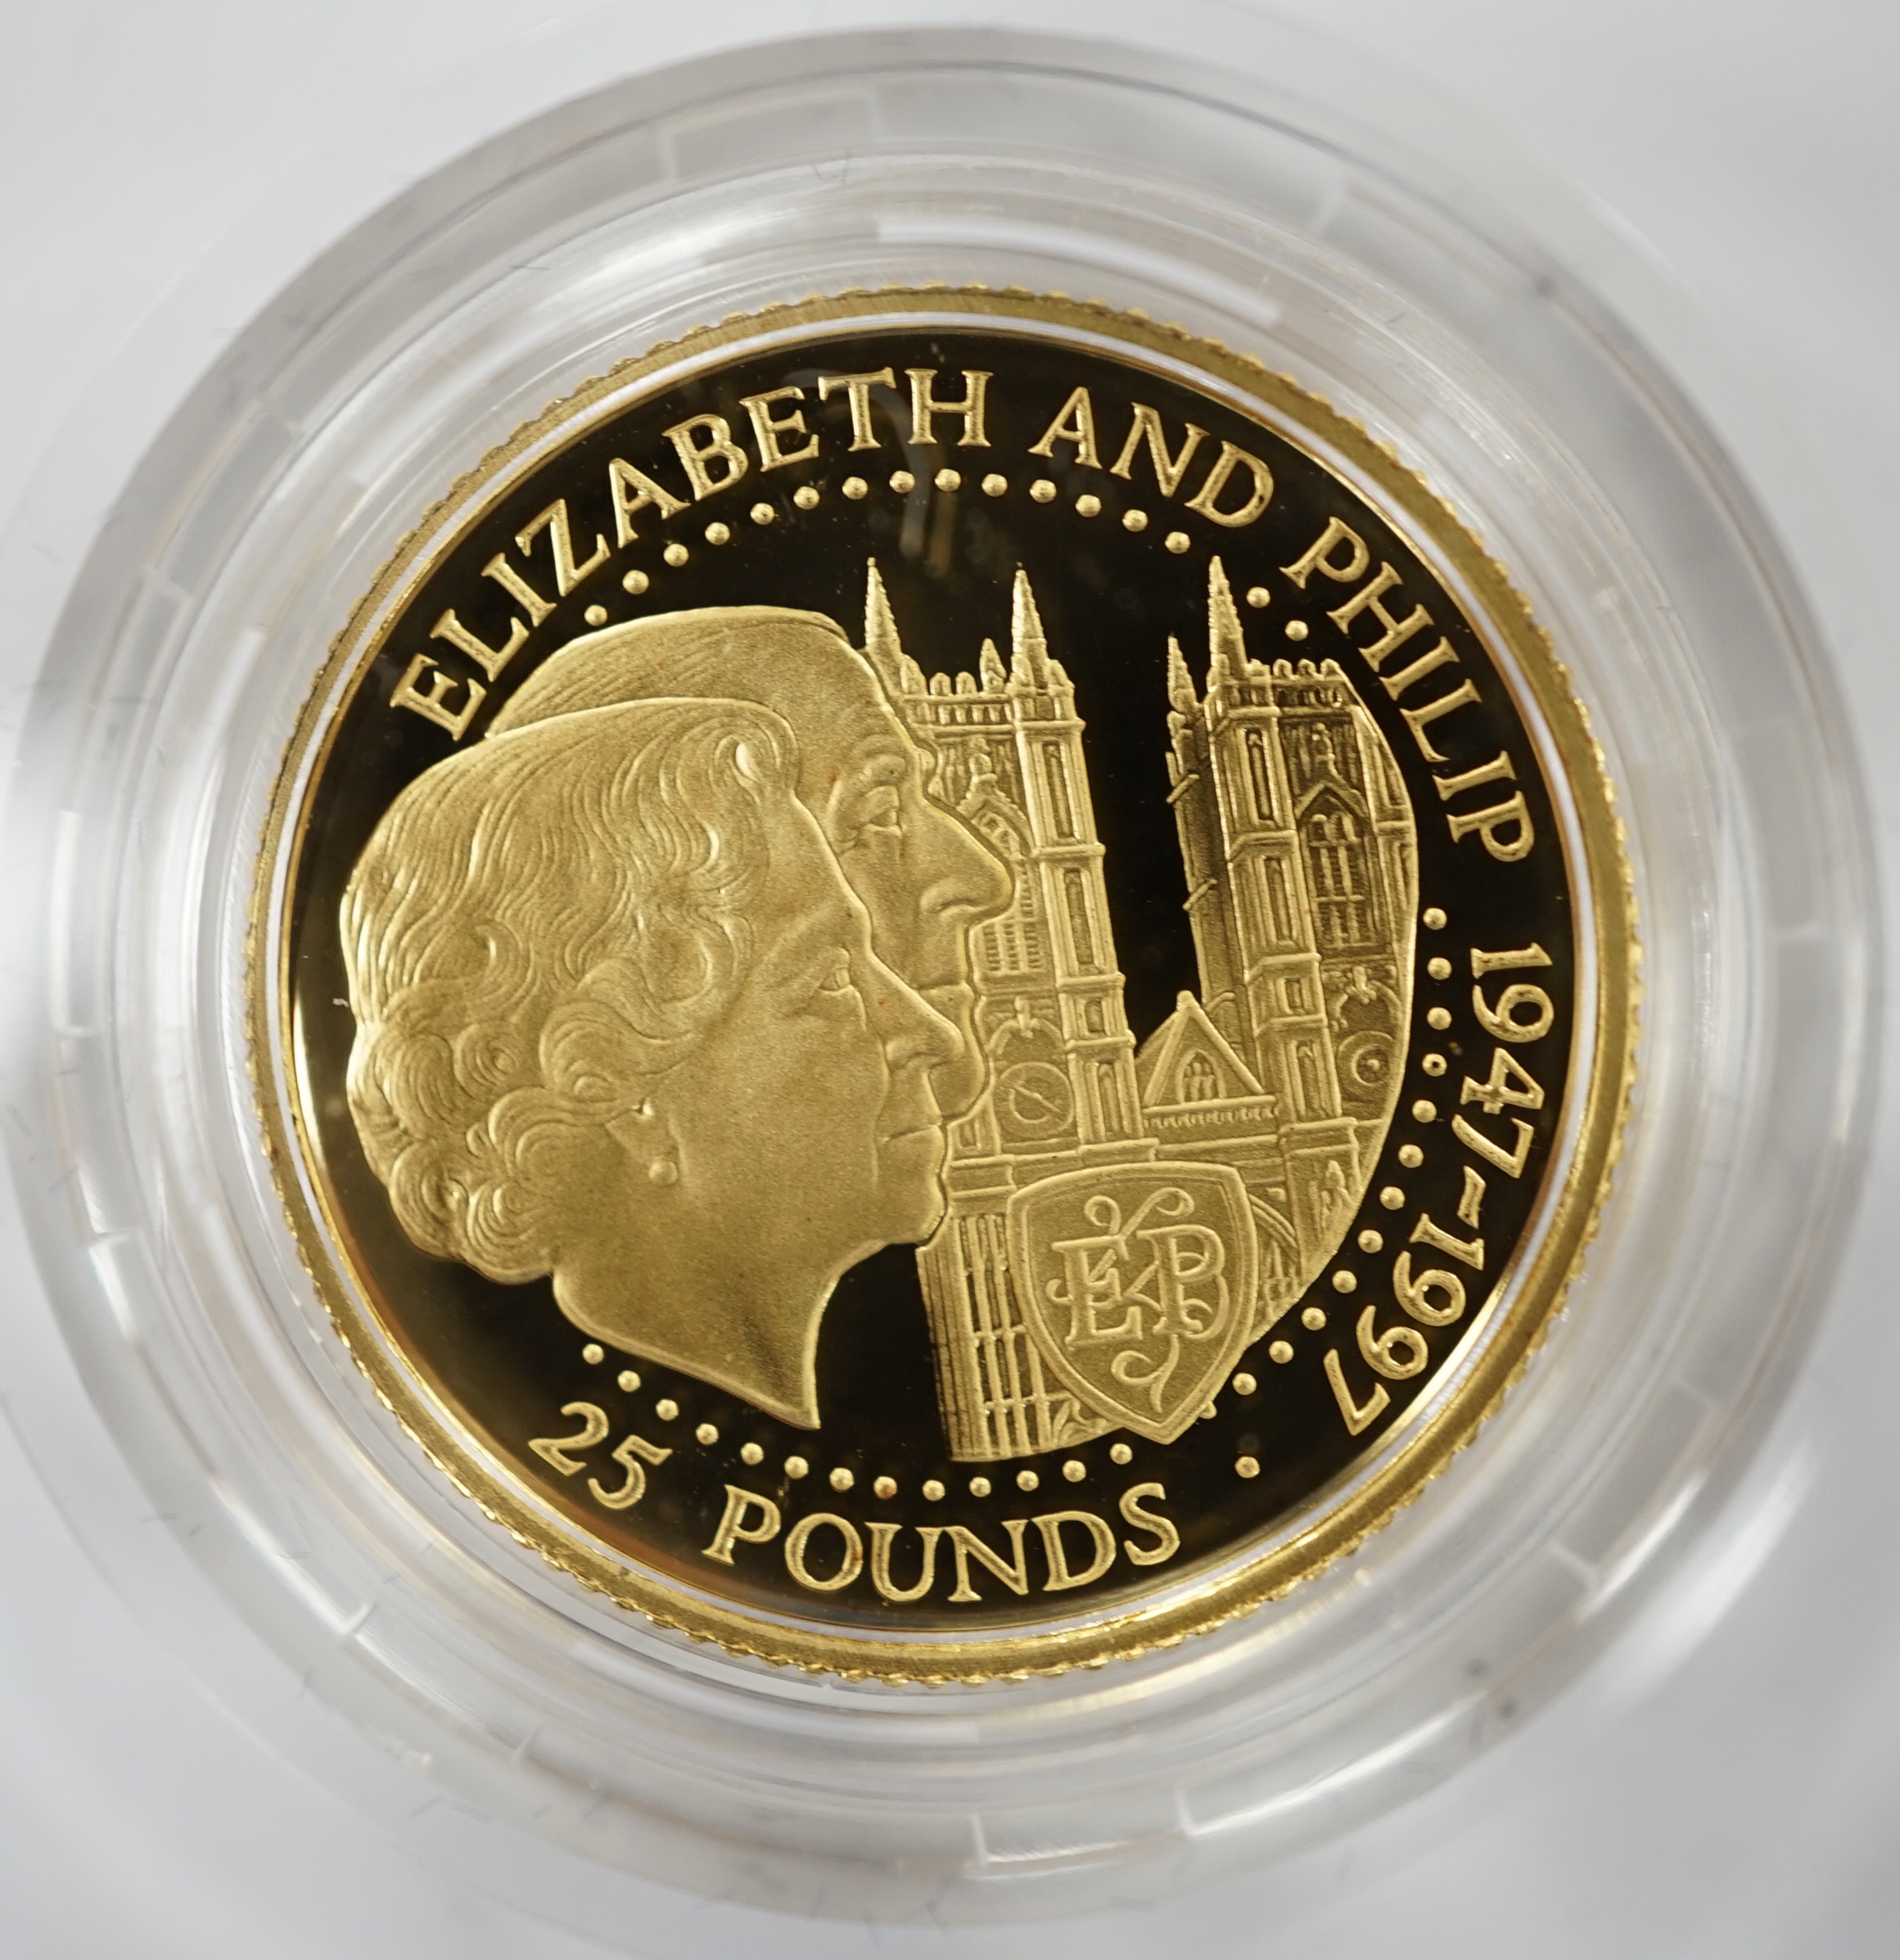 Gold coins, Guernsey, 1997 gold proof £25 coin, commemorating the Golden wedding of HM QEII and Prince Philip, in Westminster case with Royal Mint certificate